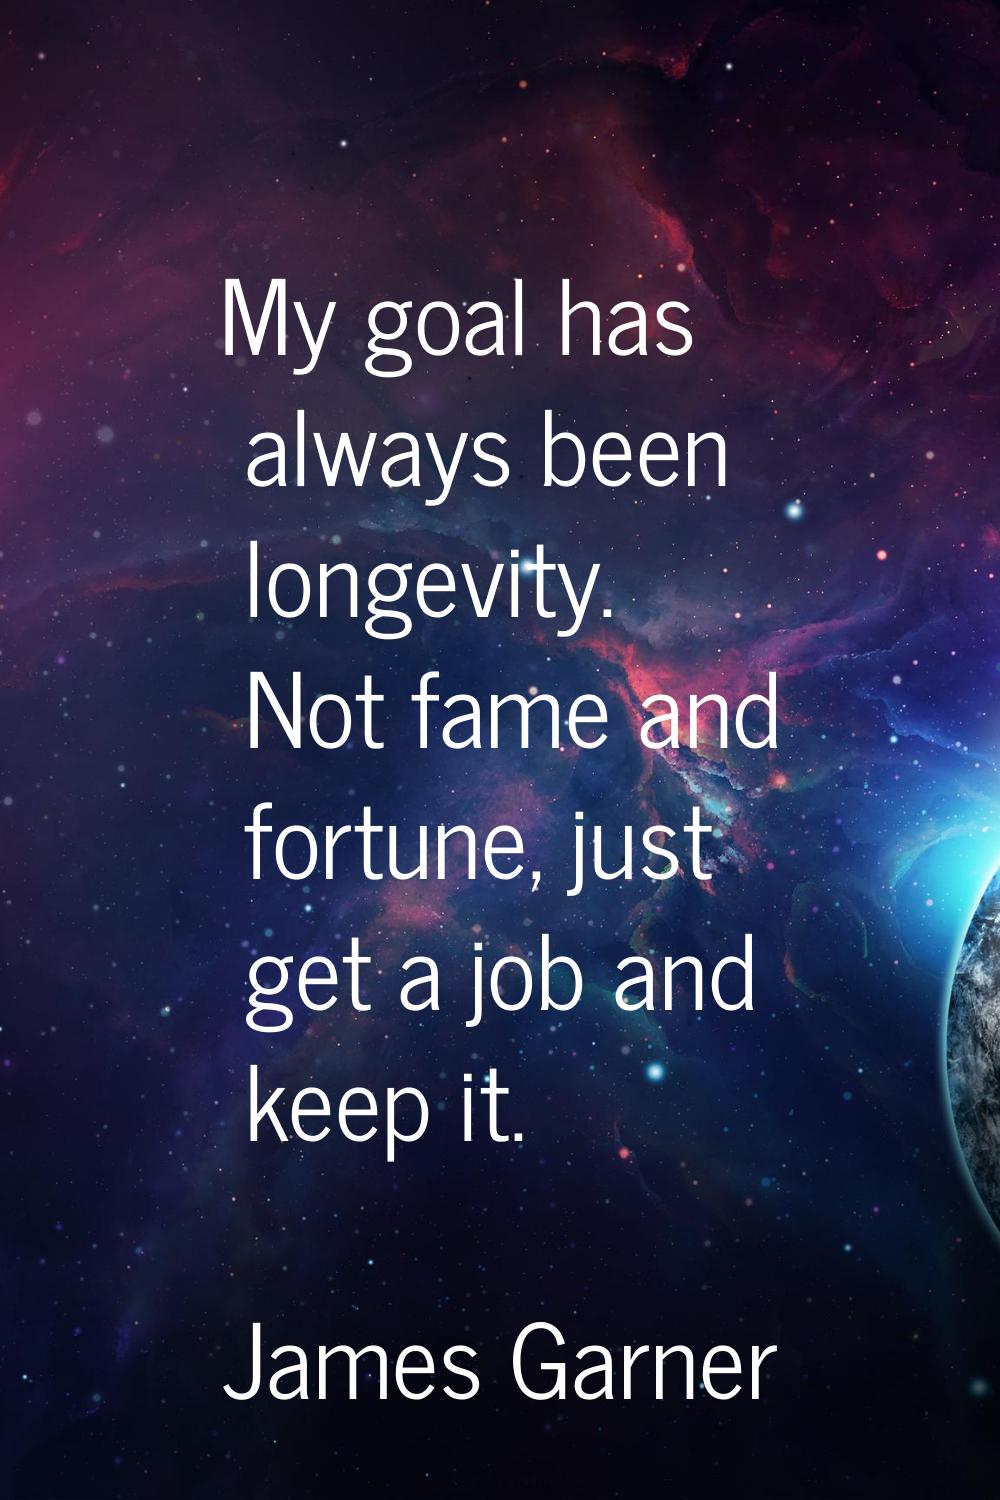 My goal has always been longevity. Not fame and fortune, just get a job and keep it.